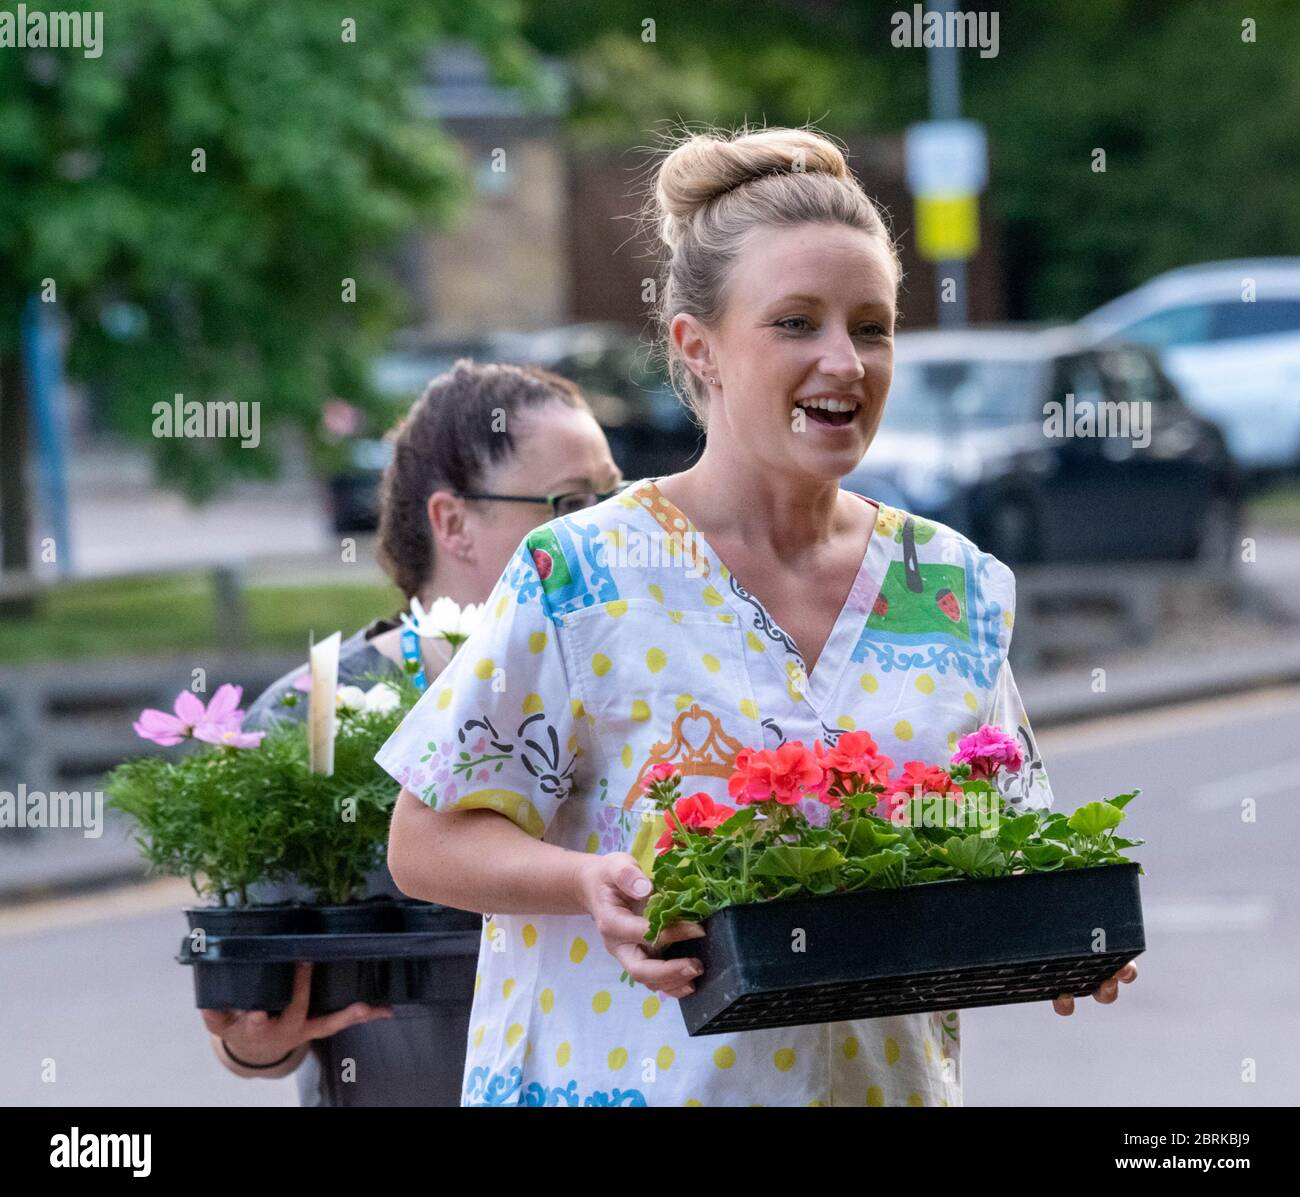 Brentwood Essex 21st May 2020 Clap for NHS at Brentwood Commuity hosptial, currently a covid facility. Local residents had purchased over 120 plants for the staff for their gardens. Another resident of the road had made 'superhero' scrubs for staff some of whom are pictured NHS worker with plants from local residents Credit: Ian Davidson/Alamy Live News Stock Photo